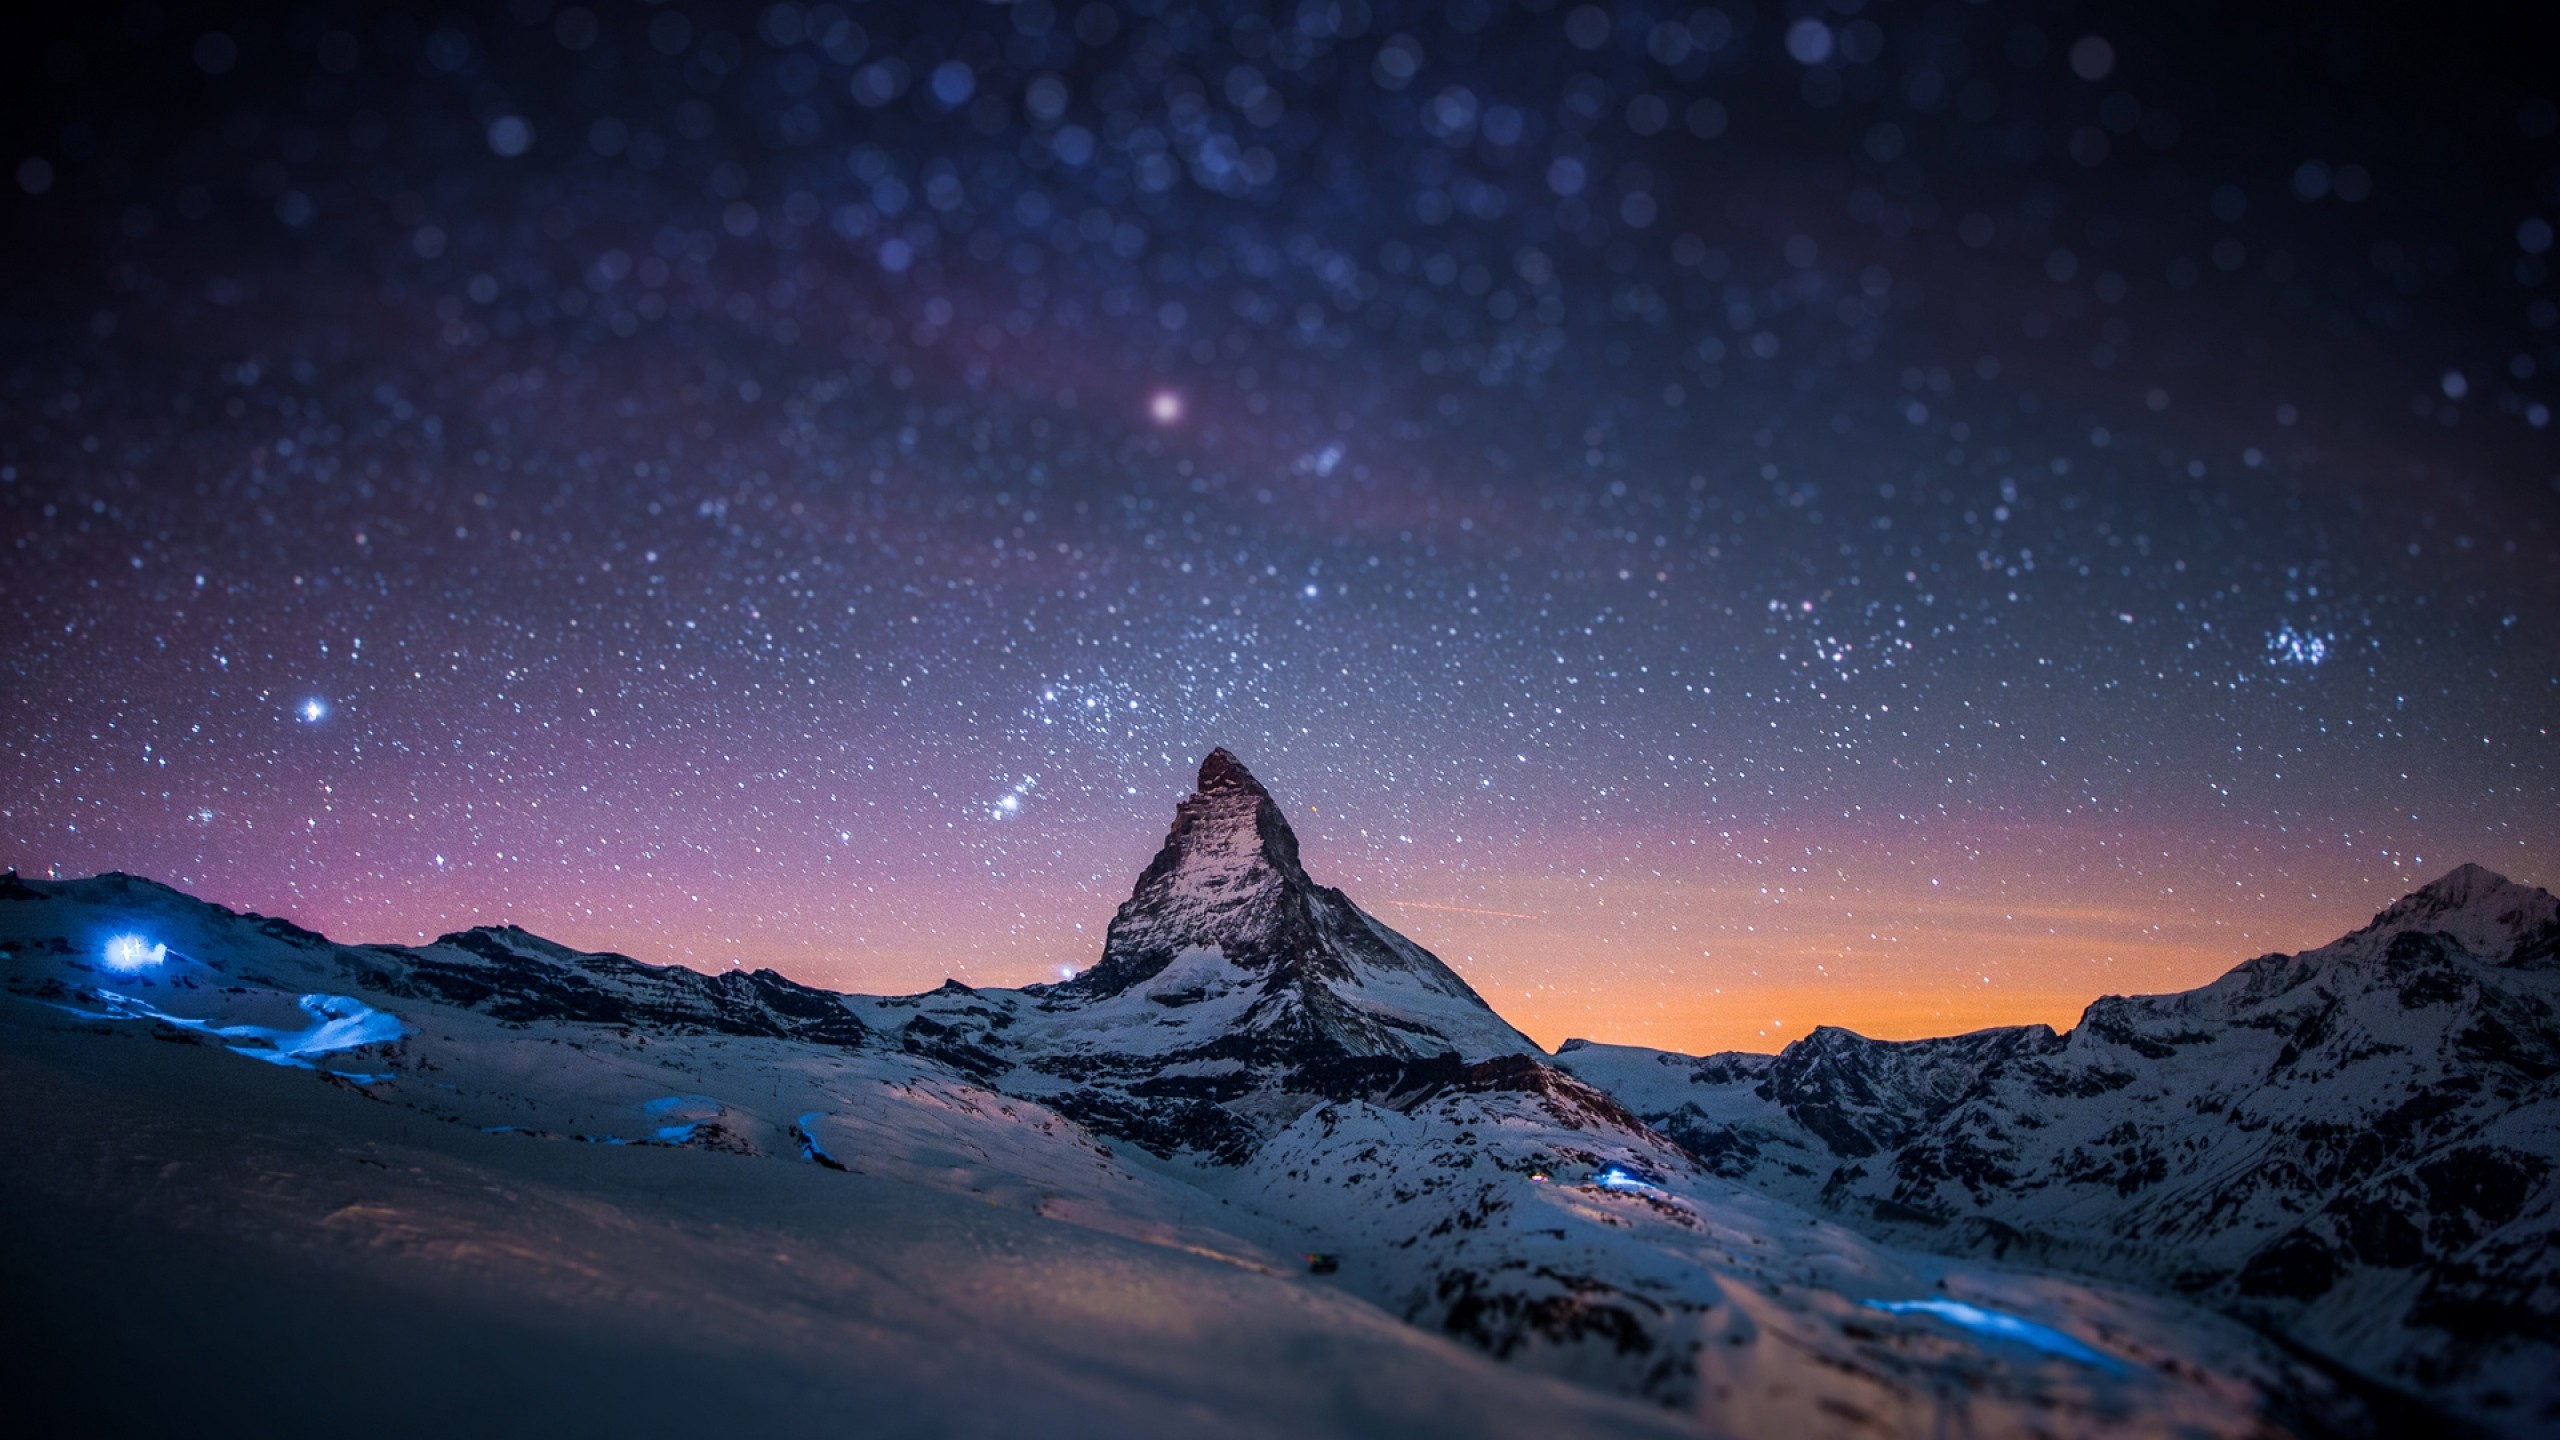 2560x1440 Full HD Wallpapers 1080p Night Sky Mountains